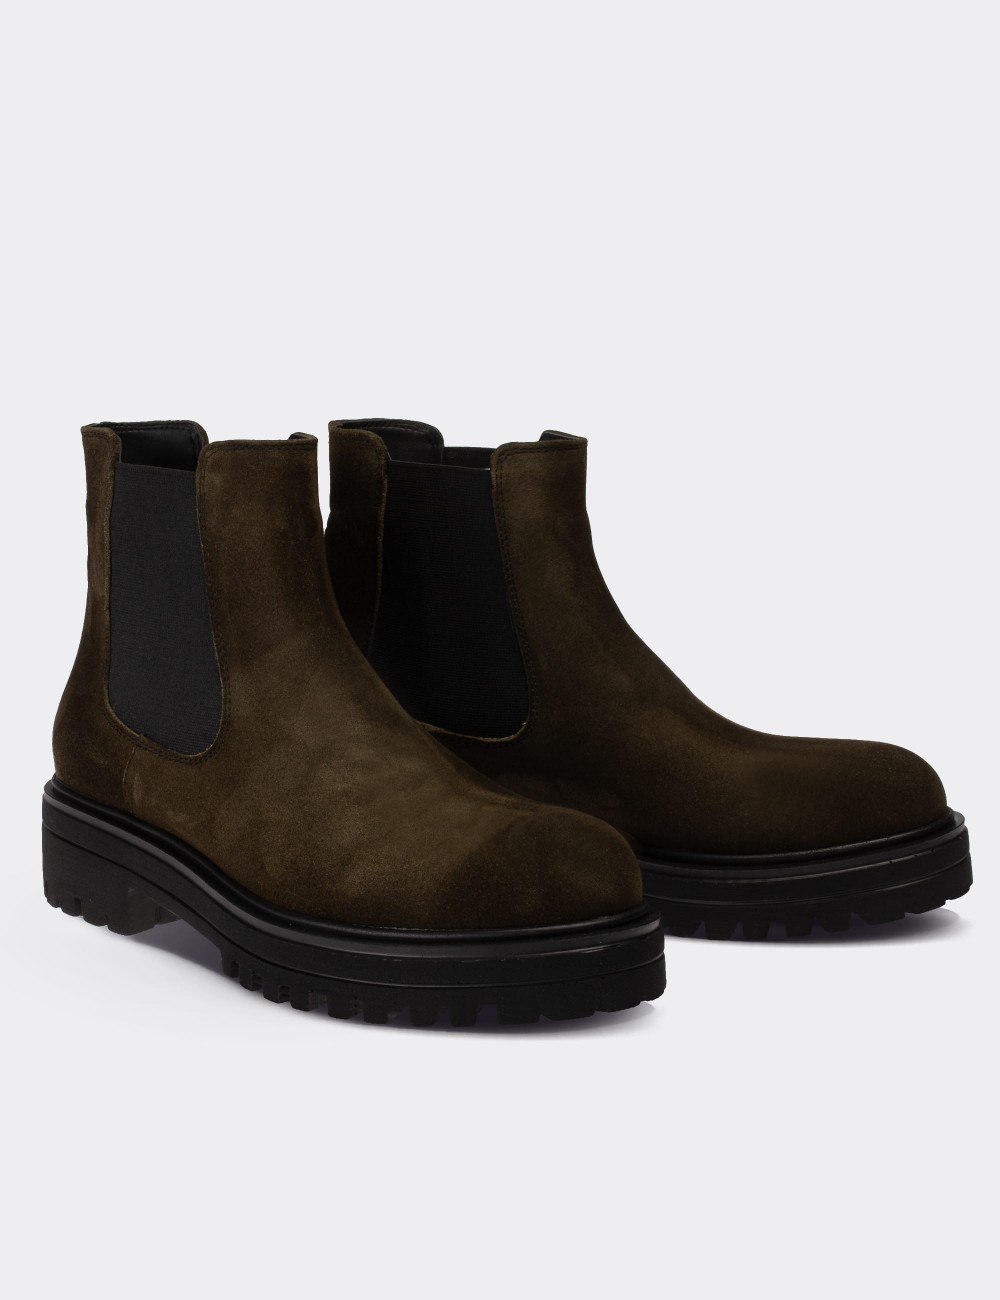 Green Suede Leather Chelsea Boots - 01801ZYSLE01